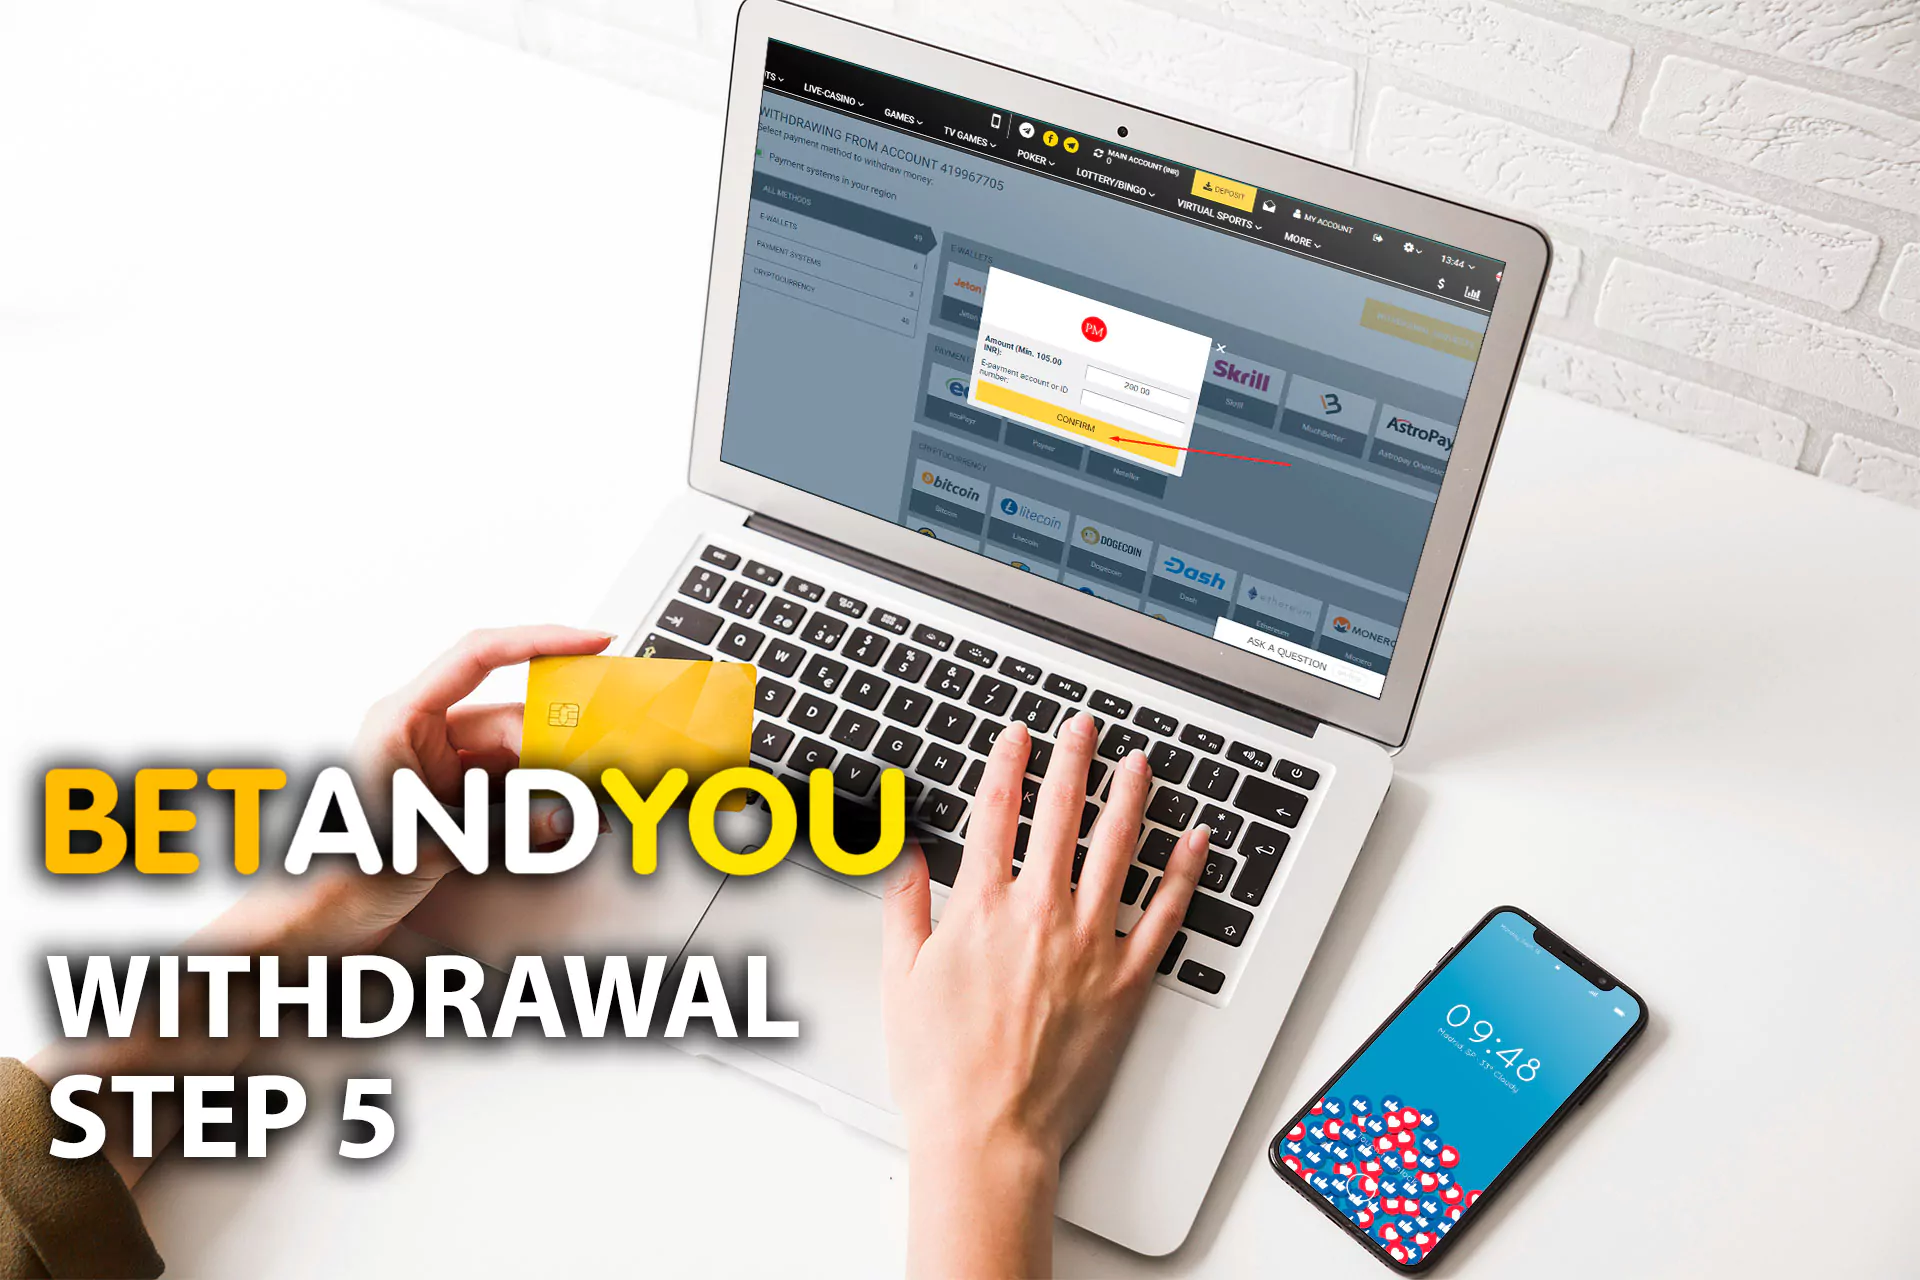 Complete the withdrawal process.